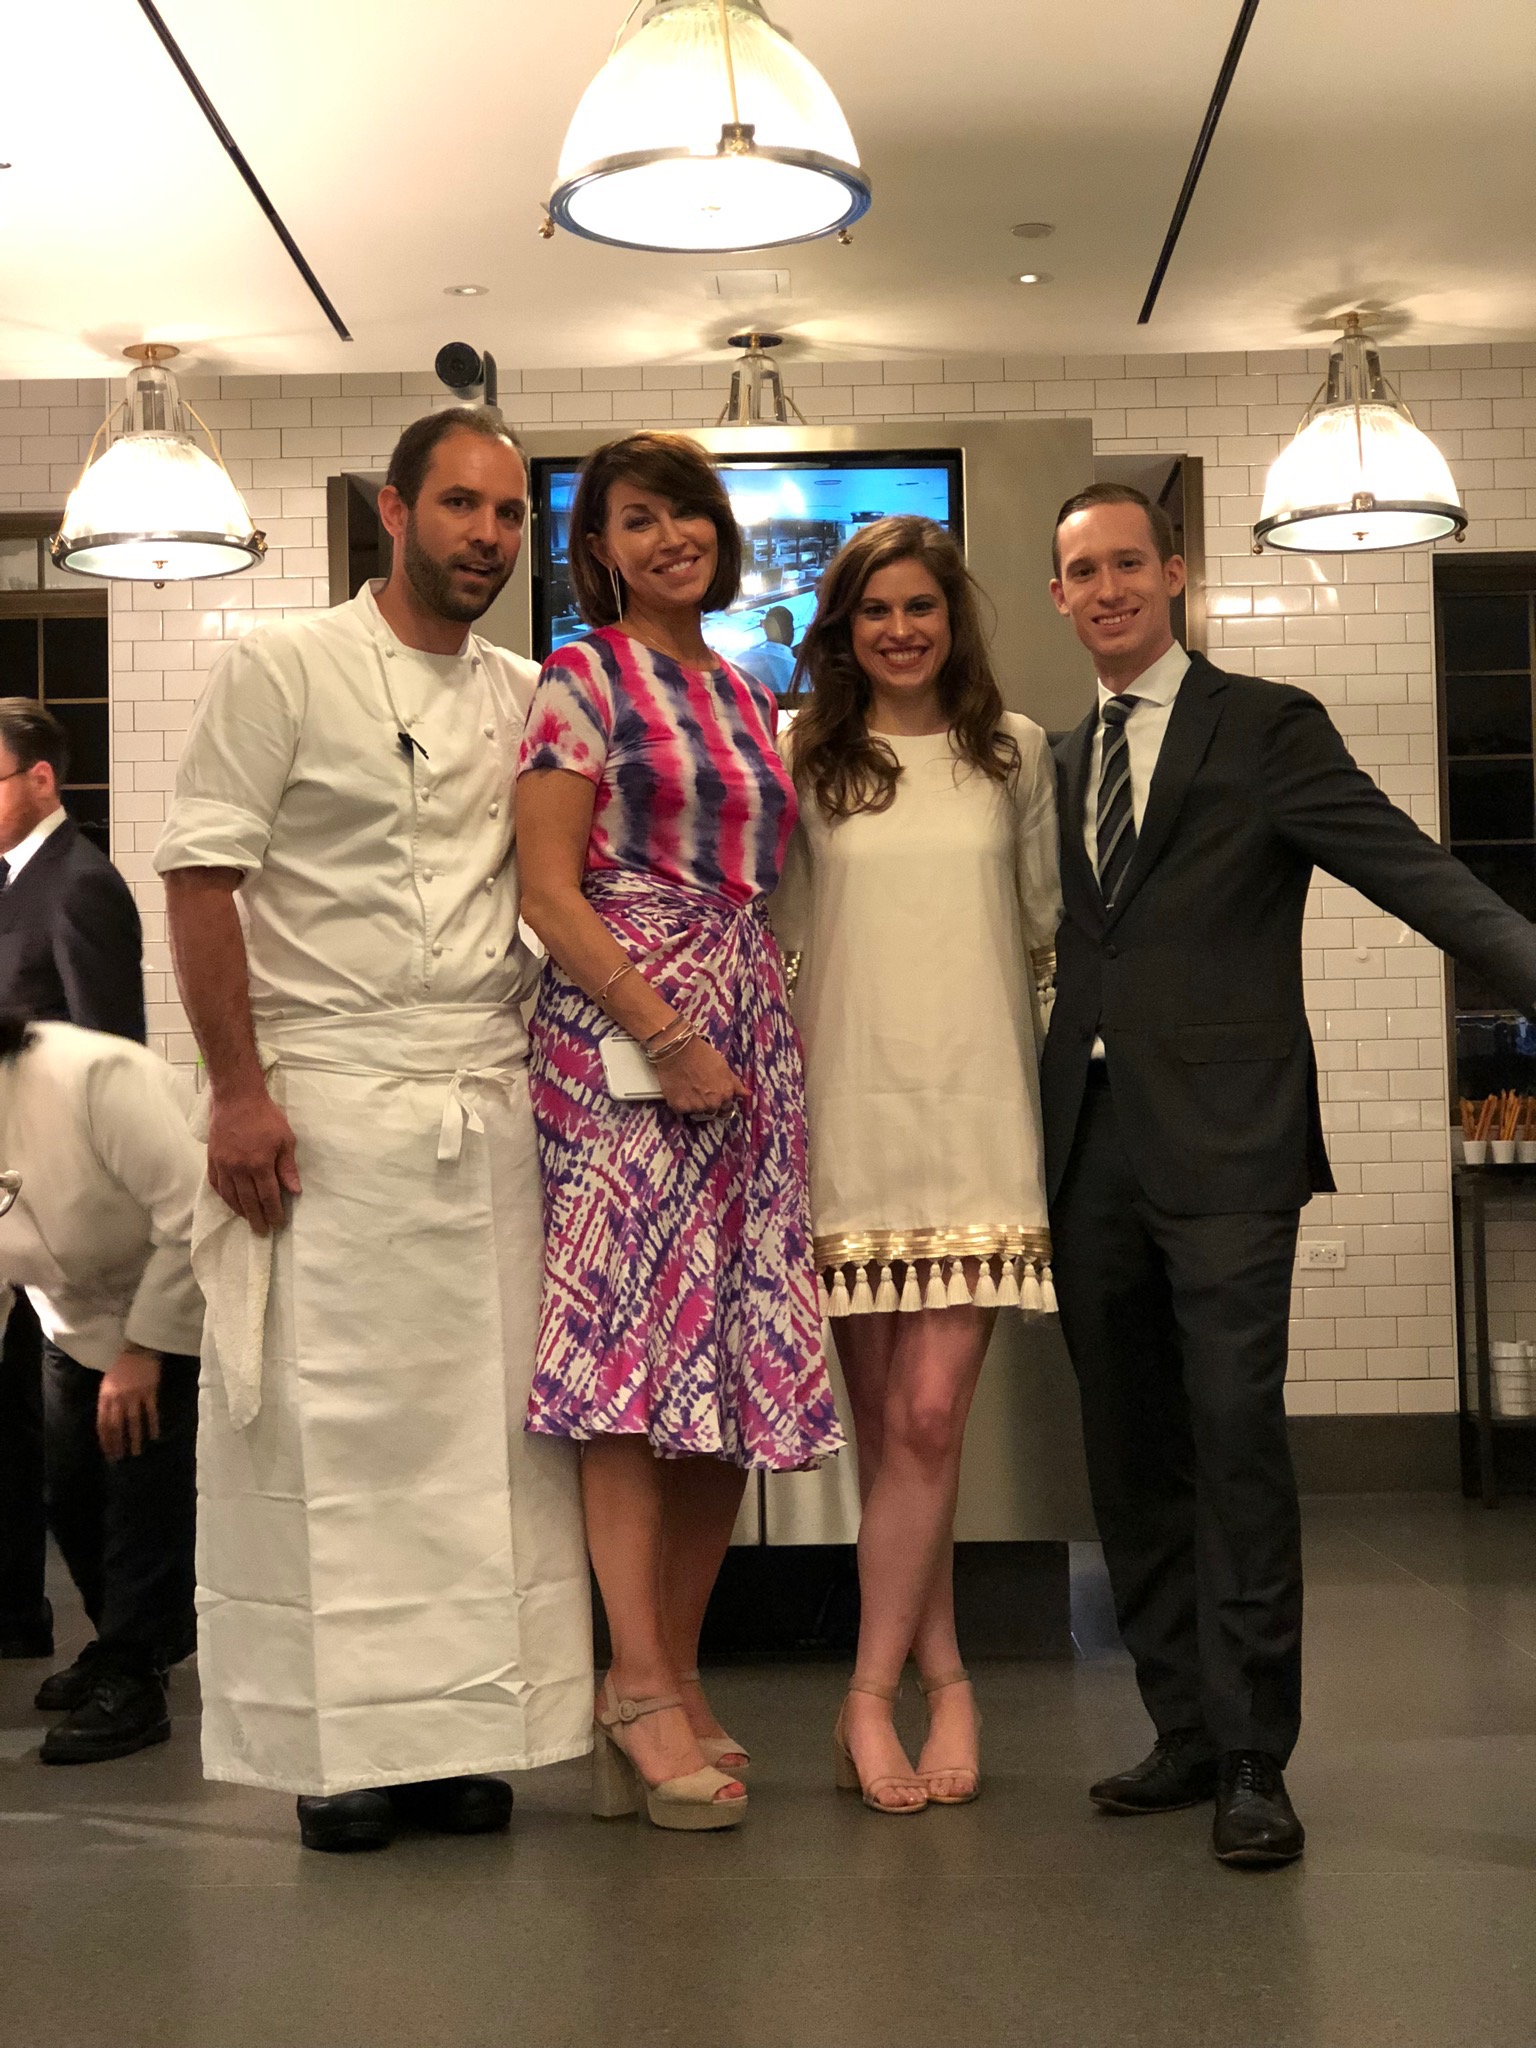 Four people: a man who is a chef in his chef outfit, a woman wearing a tie-dye pink, purple and white outfit, a woman in a cream dress in heels and a man in a suit standing in a kitchen. All have brown hair